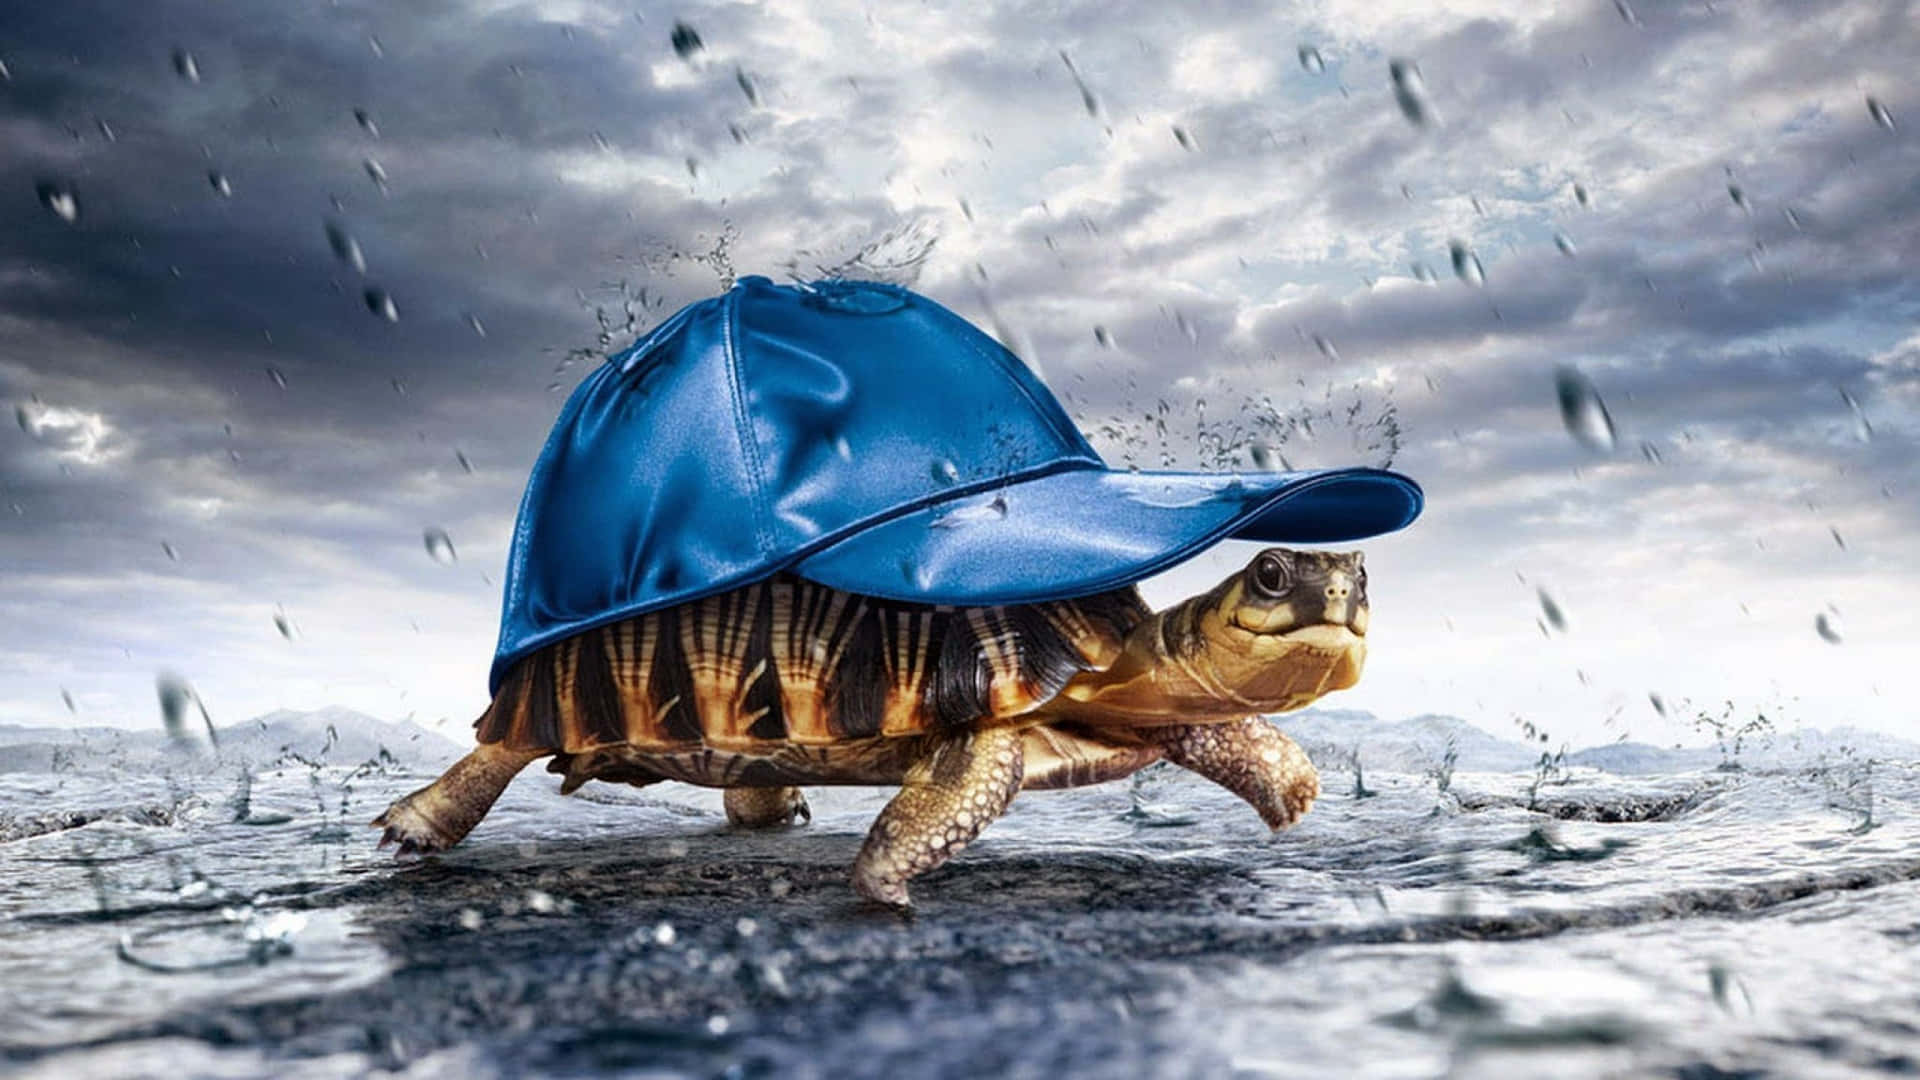 Turtle With A Blue Cap Fantasy Art